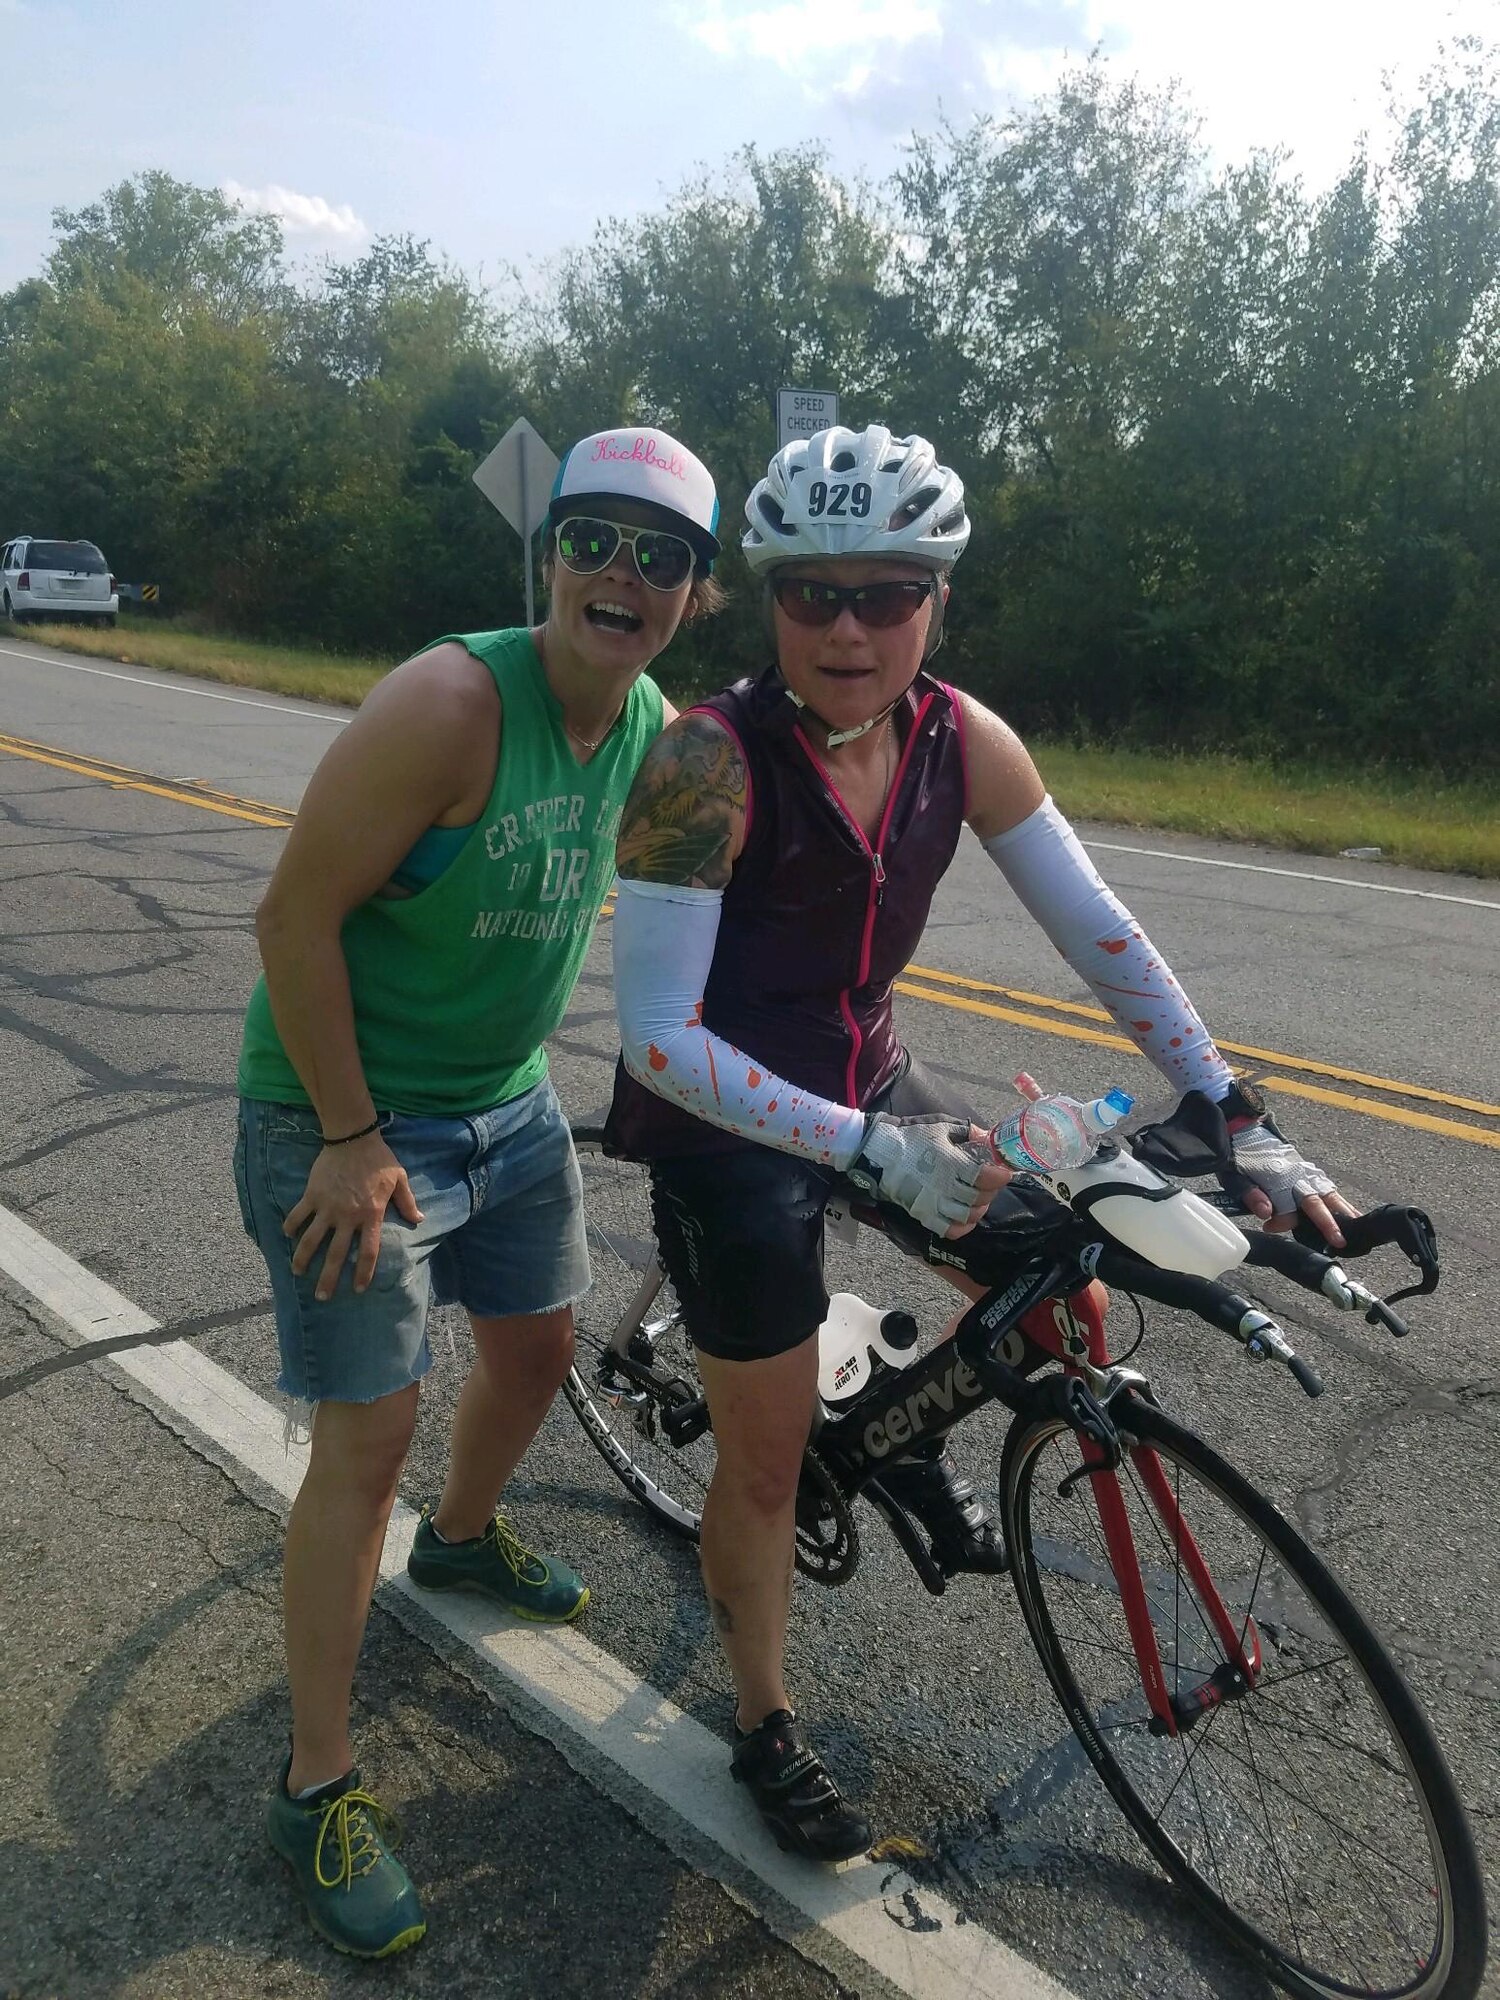 Senior Master Sgt. Bobbi Kennedy, 142nd Medical Group superintendent, (right), poses with friend Rebekah Lemarr during the May 19, 2019, Ironman Triathlon in Chattanooga, Tennessee.